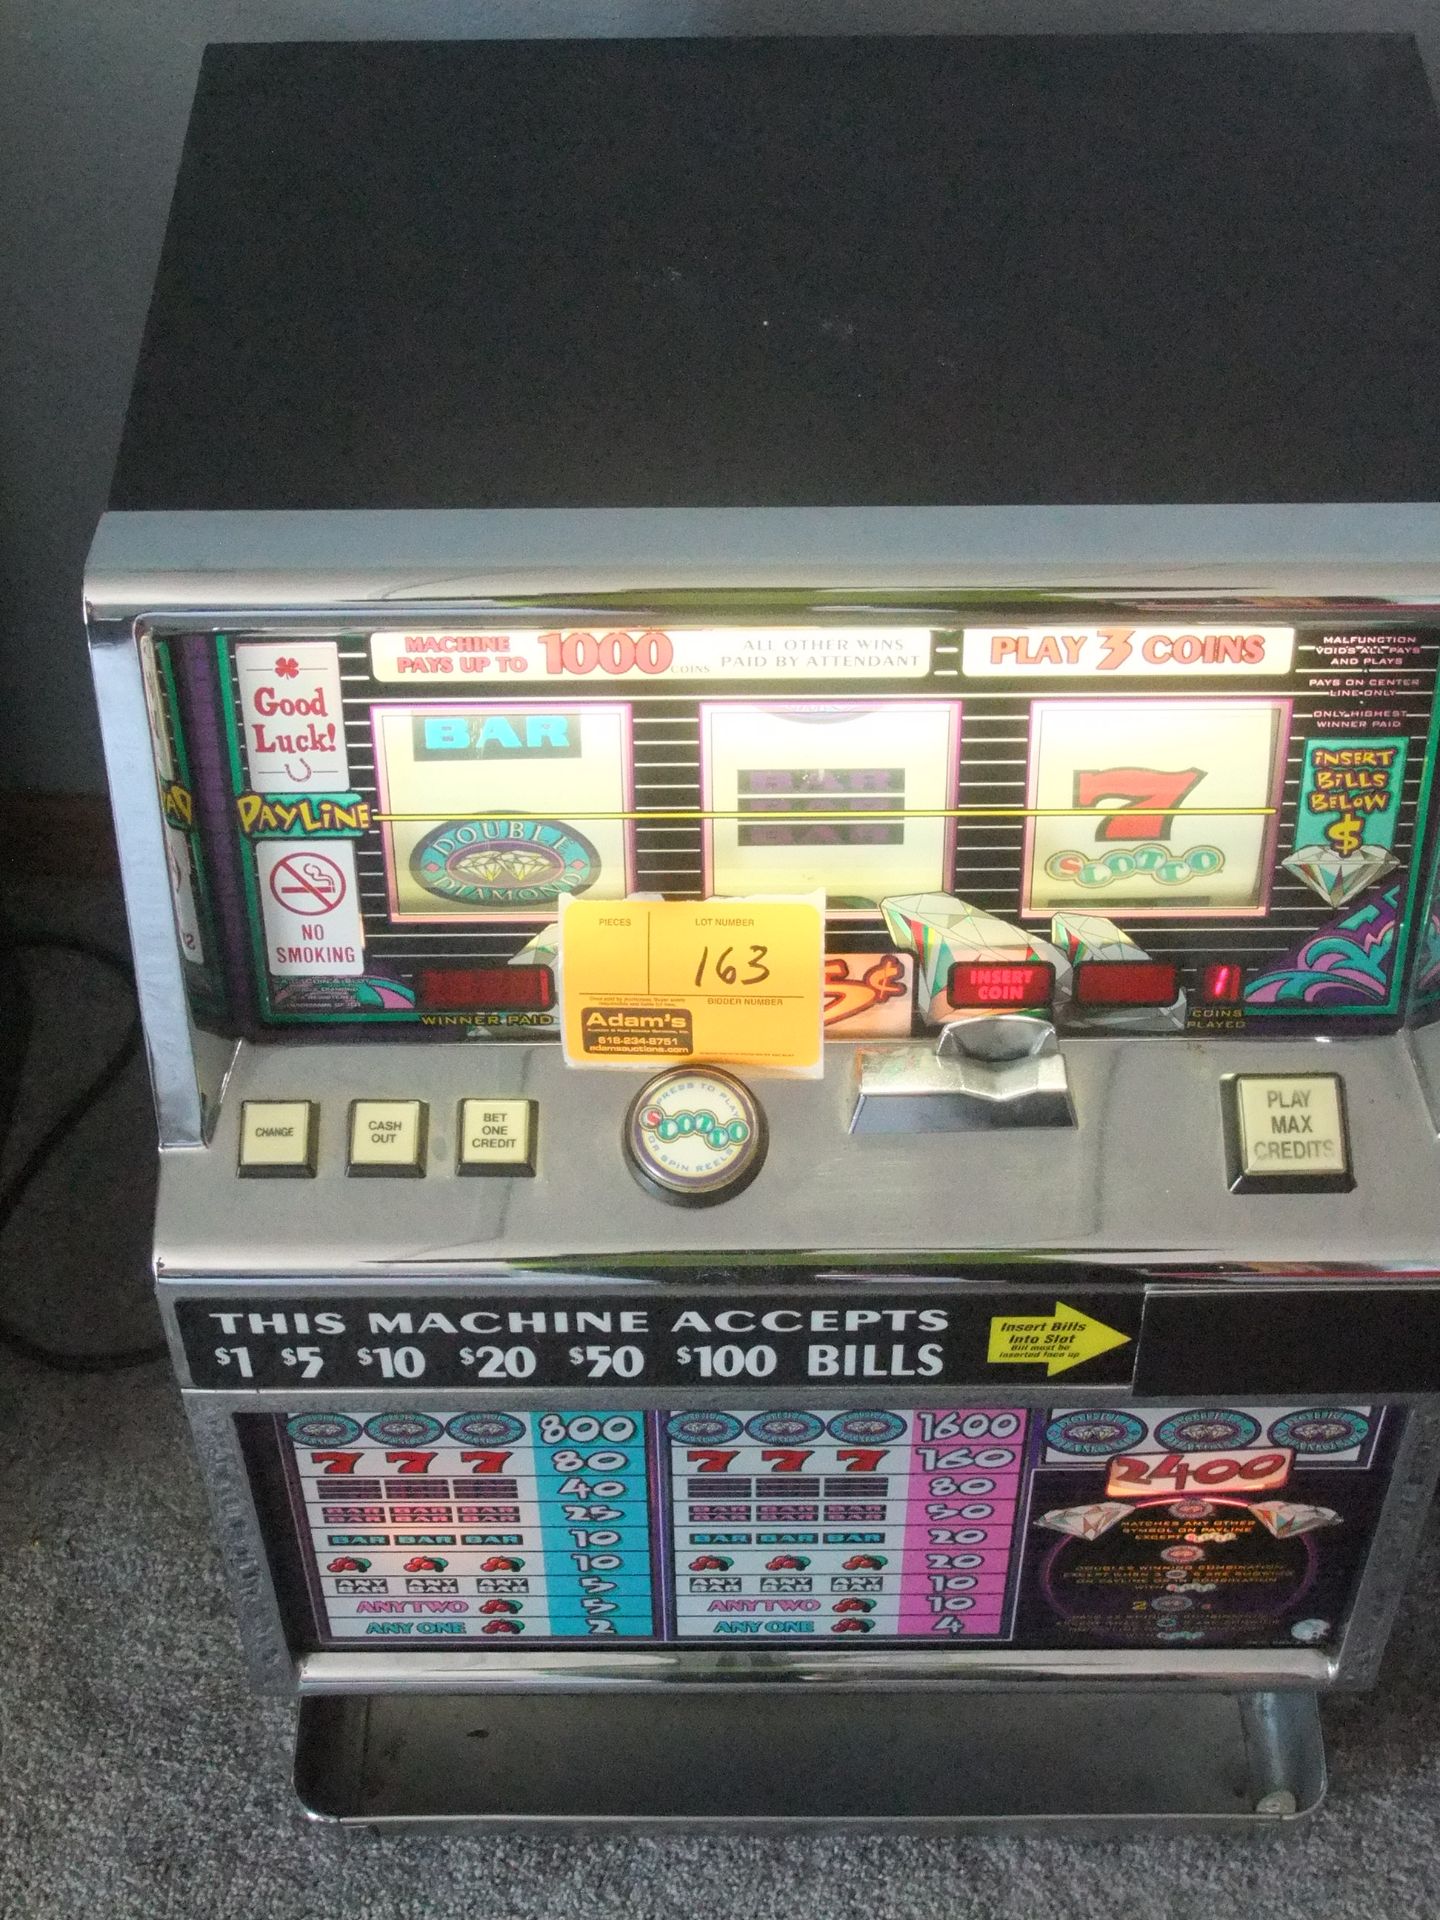 American Slot Machine from a Casino - WORKING - INTERNATIONAL GAME TECHNOLOGY/MODEL 9640030R